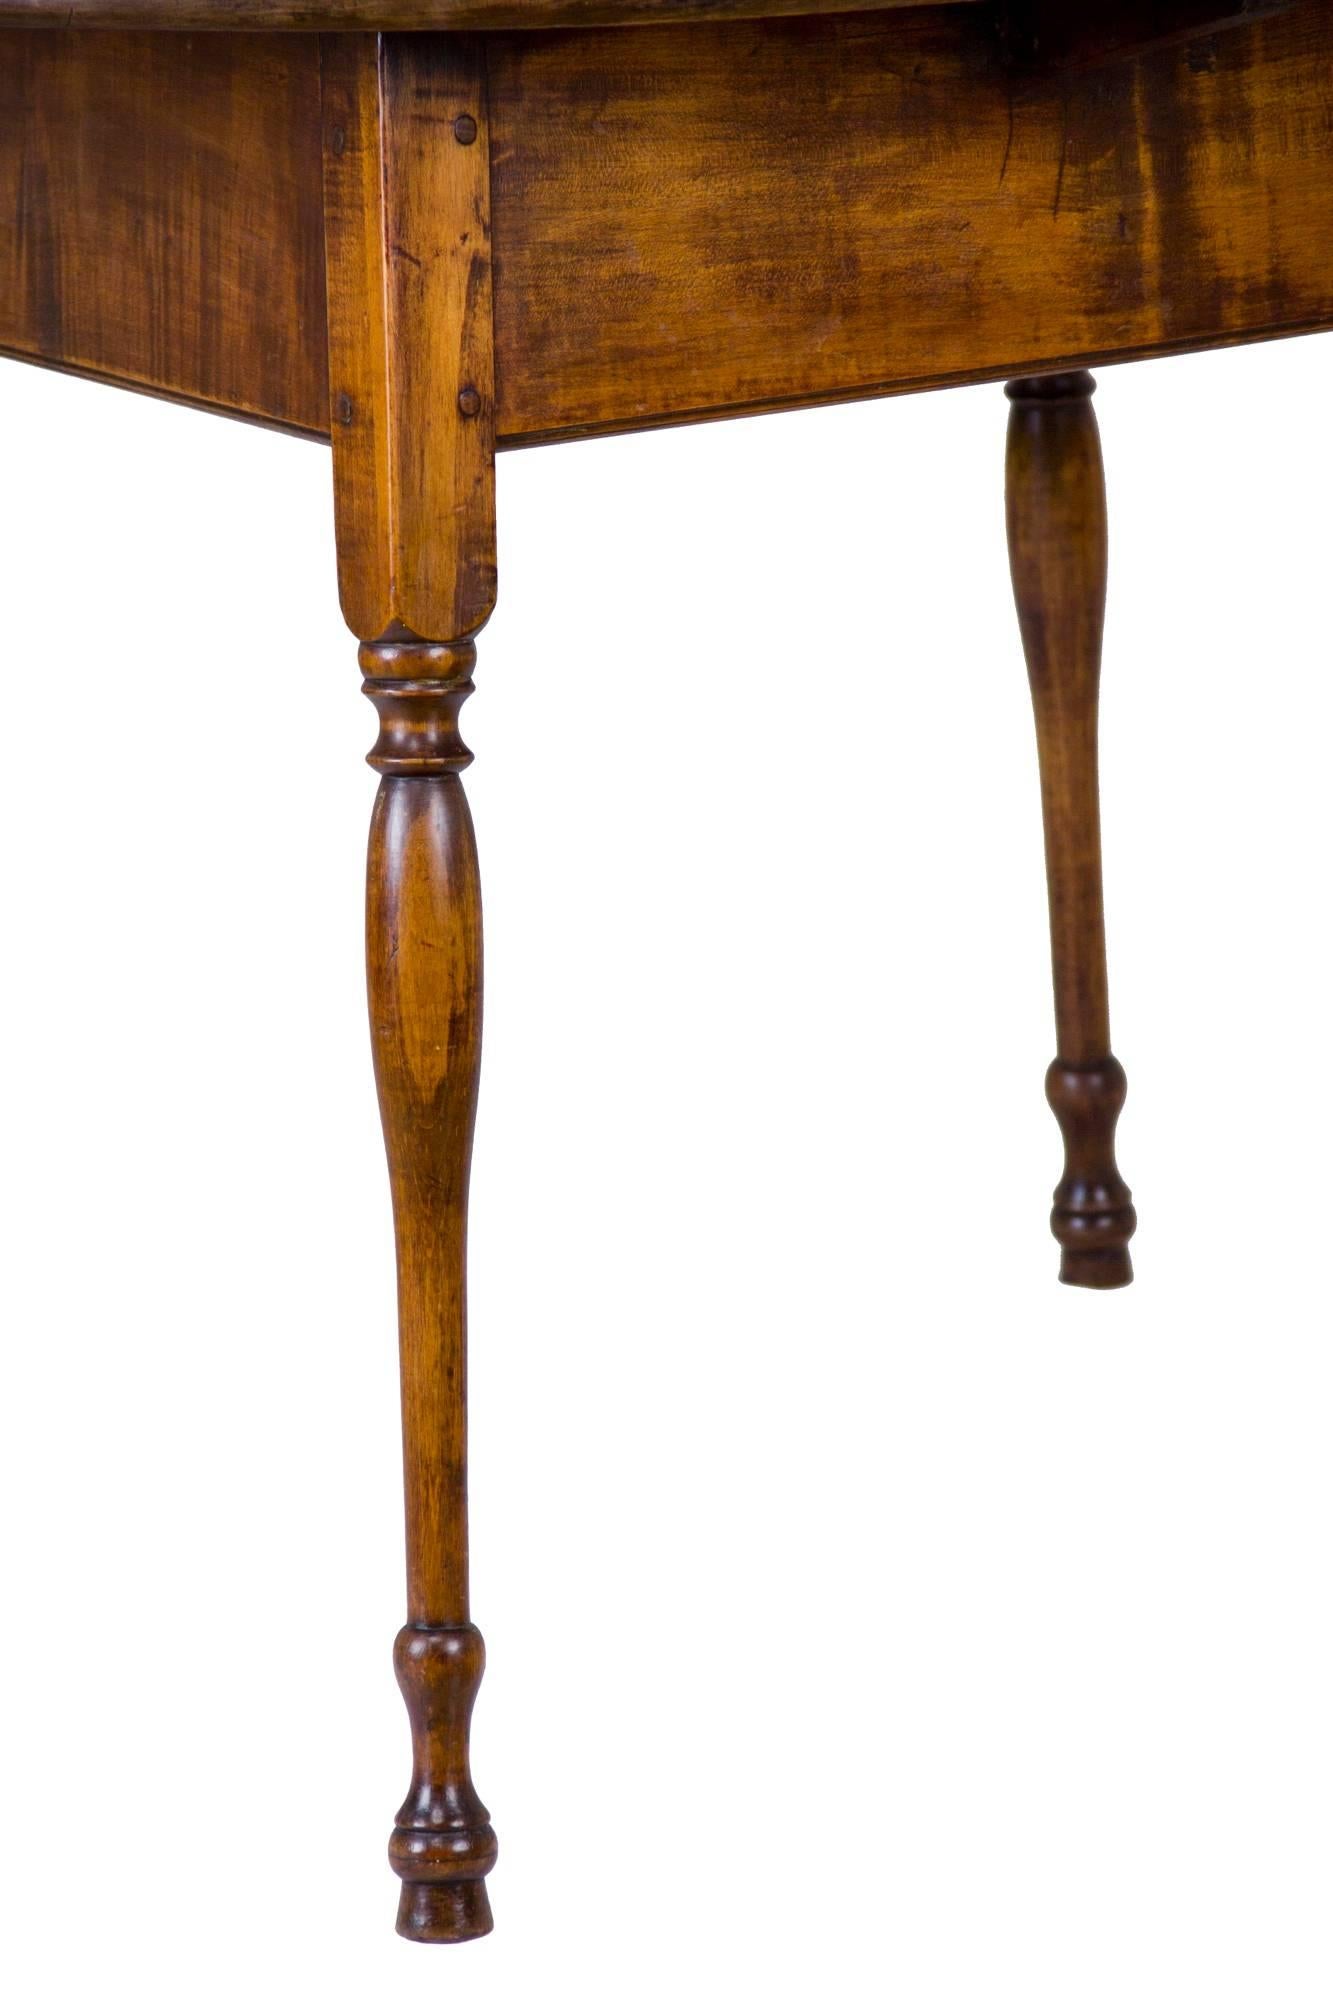 This tavern table is ideal for two people, given its generous size for the form. The top is maple--a hardwood--which is unusual, as these are often pine. The top has an old scrubbed surface that has been cleaned and washed through the years. Note,